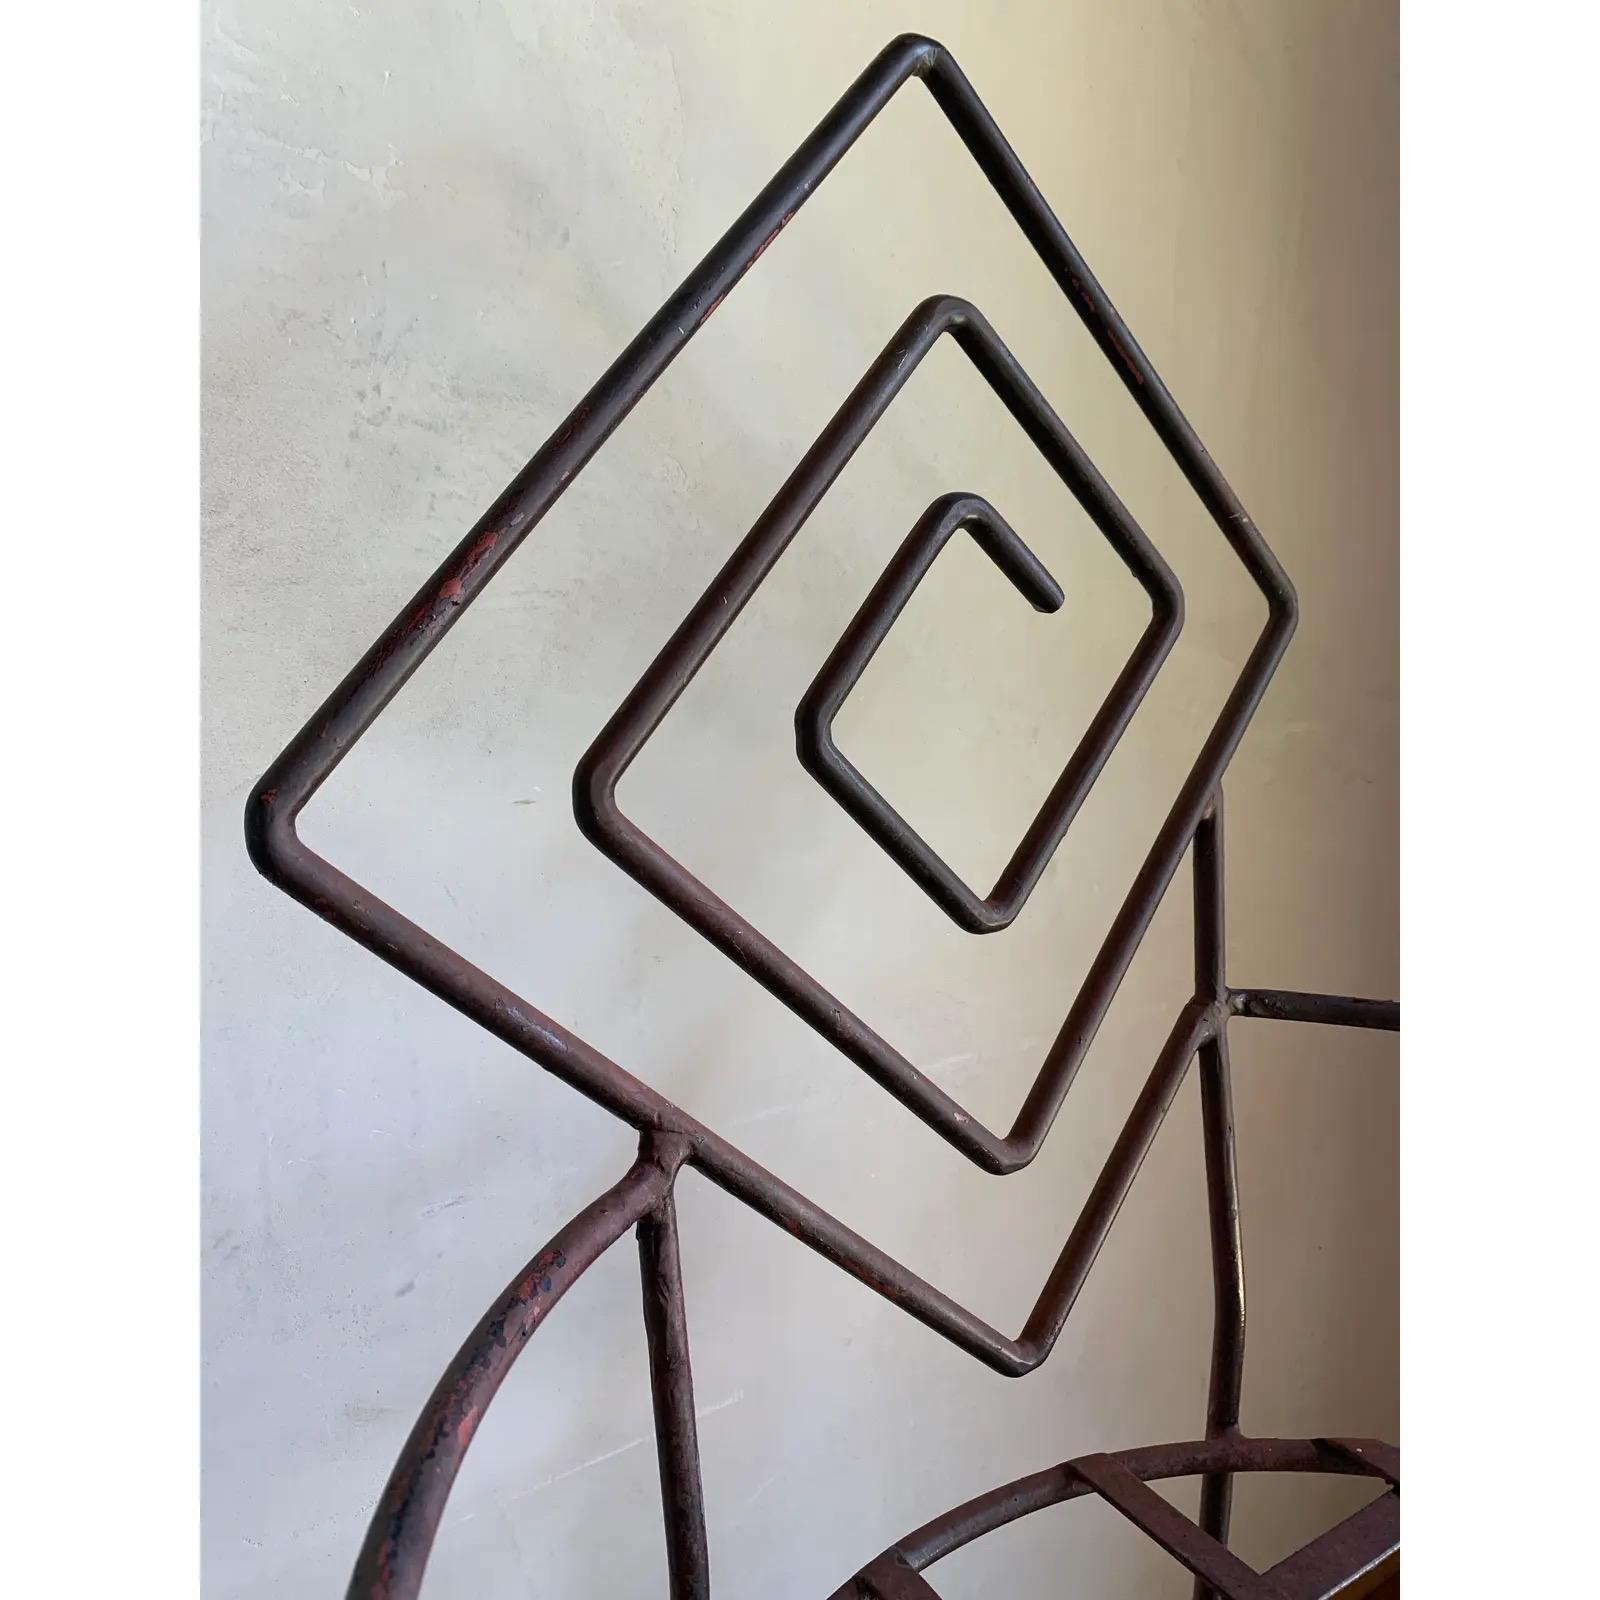 Vintage Artisan Iron Geometric Sculptural Frank Lloyd Wright Style Armchairs-4 In Good Condition For Sale In El Cajon, CA